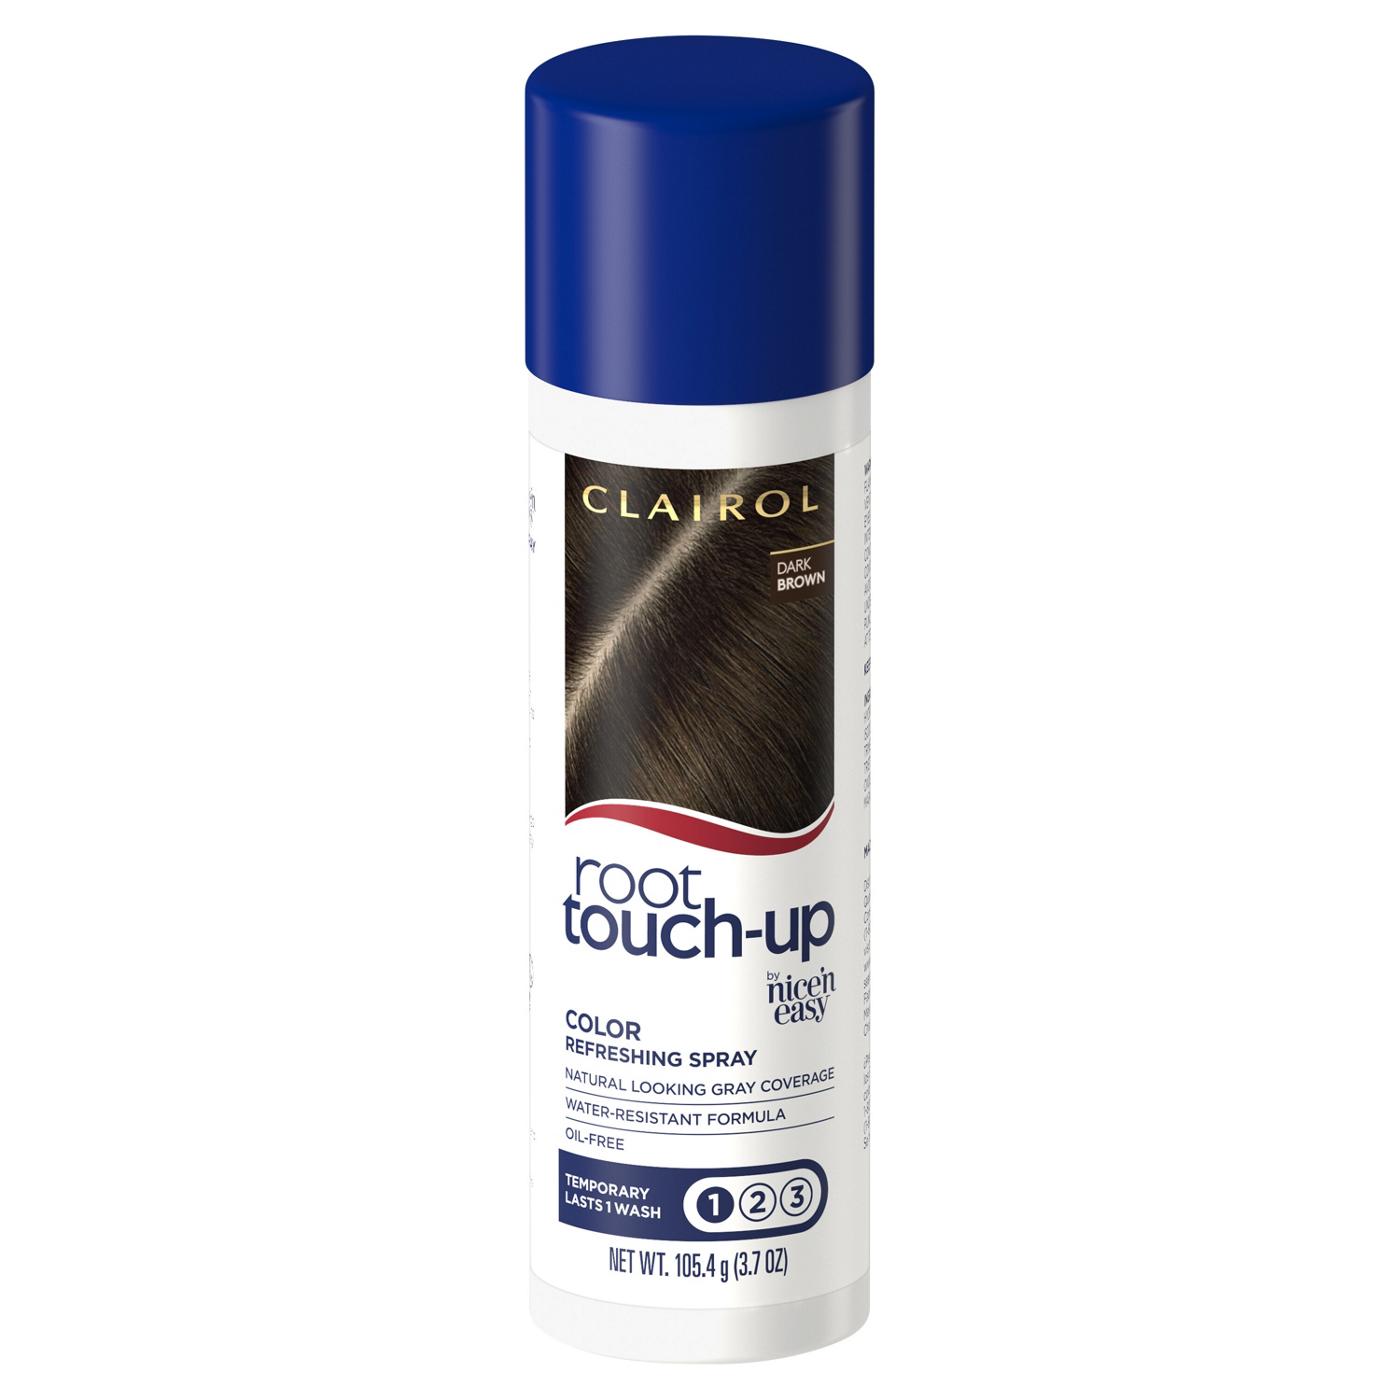 Clairol Root Touch-Up Color Refreshing Spray Dark Brown; image 1 of 3